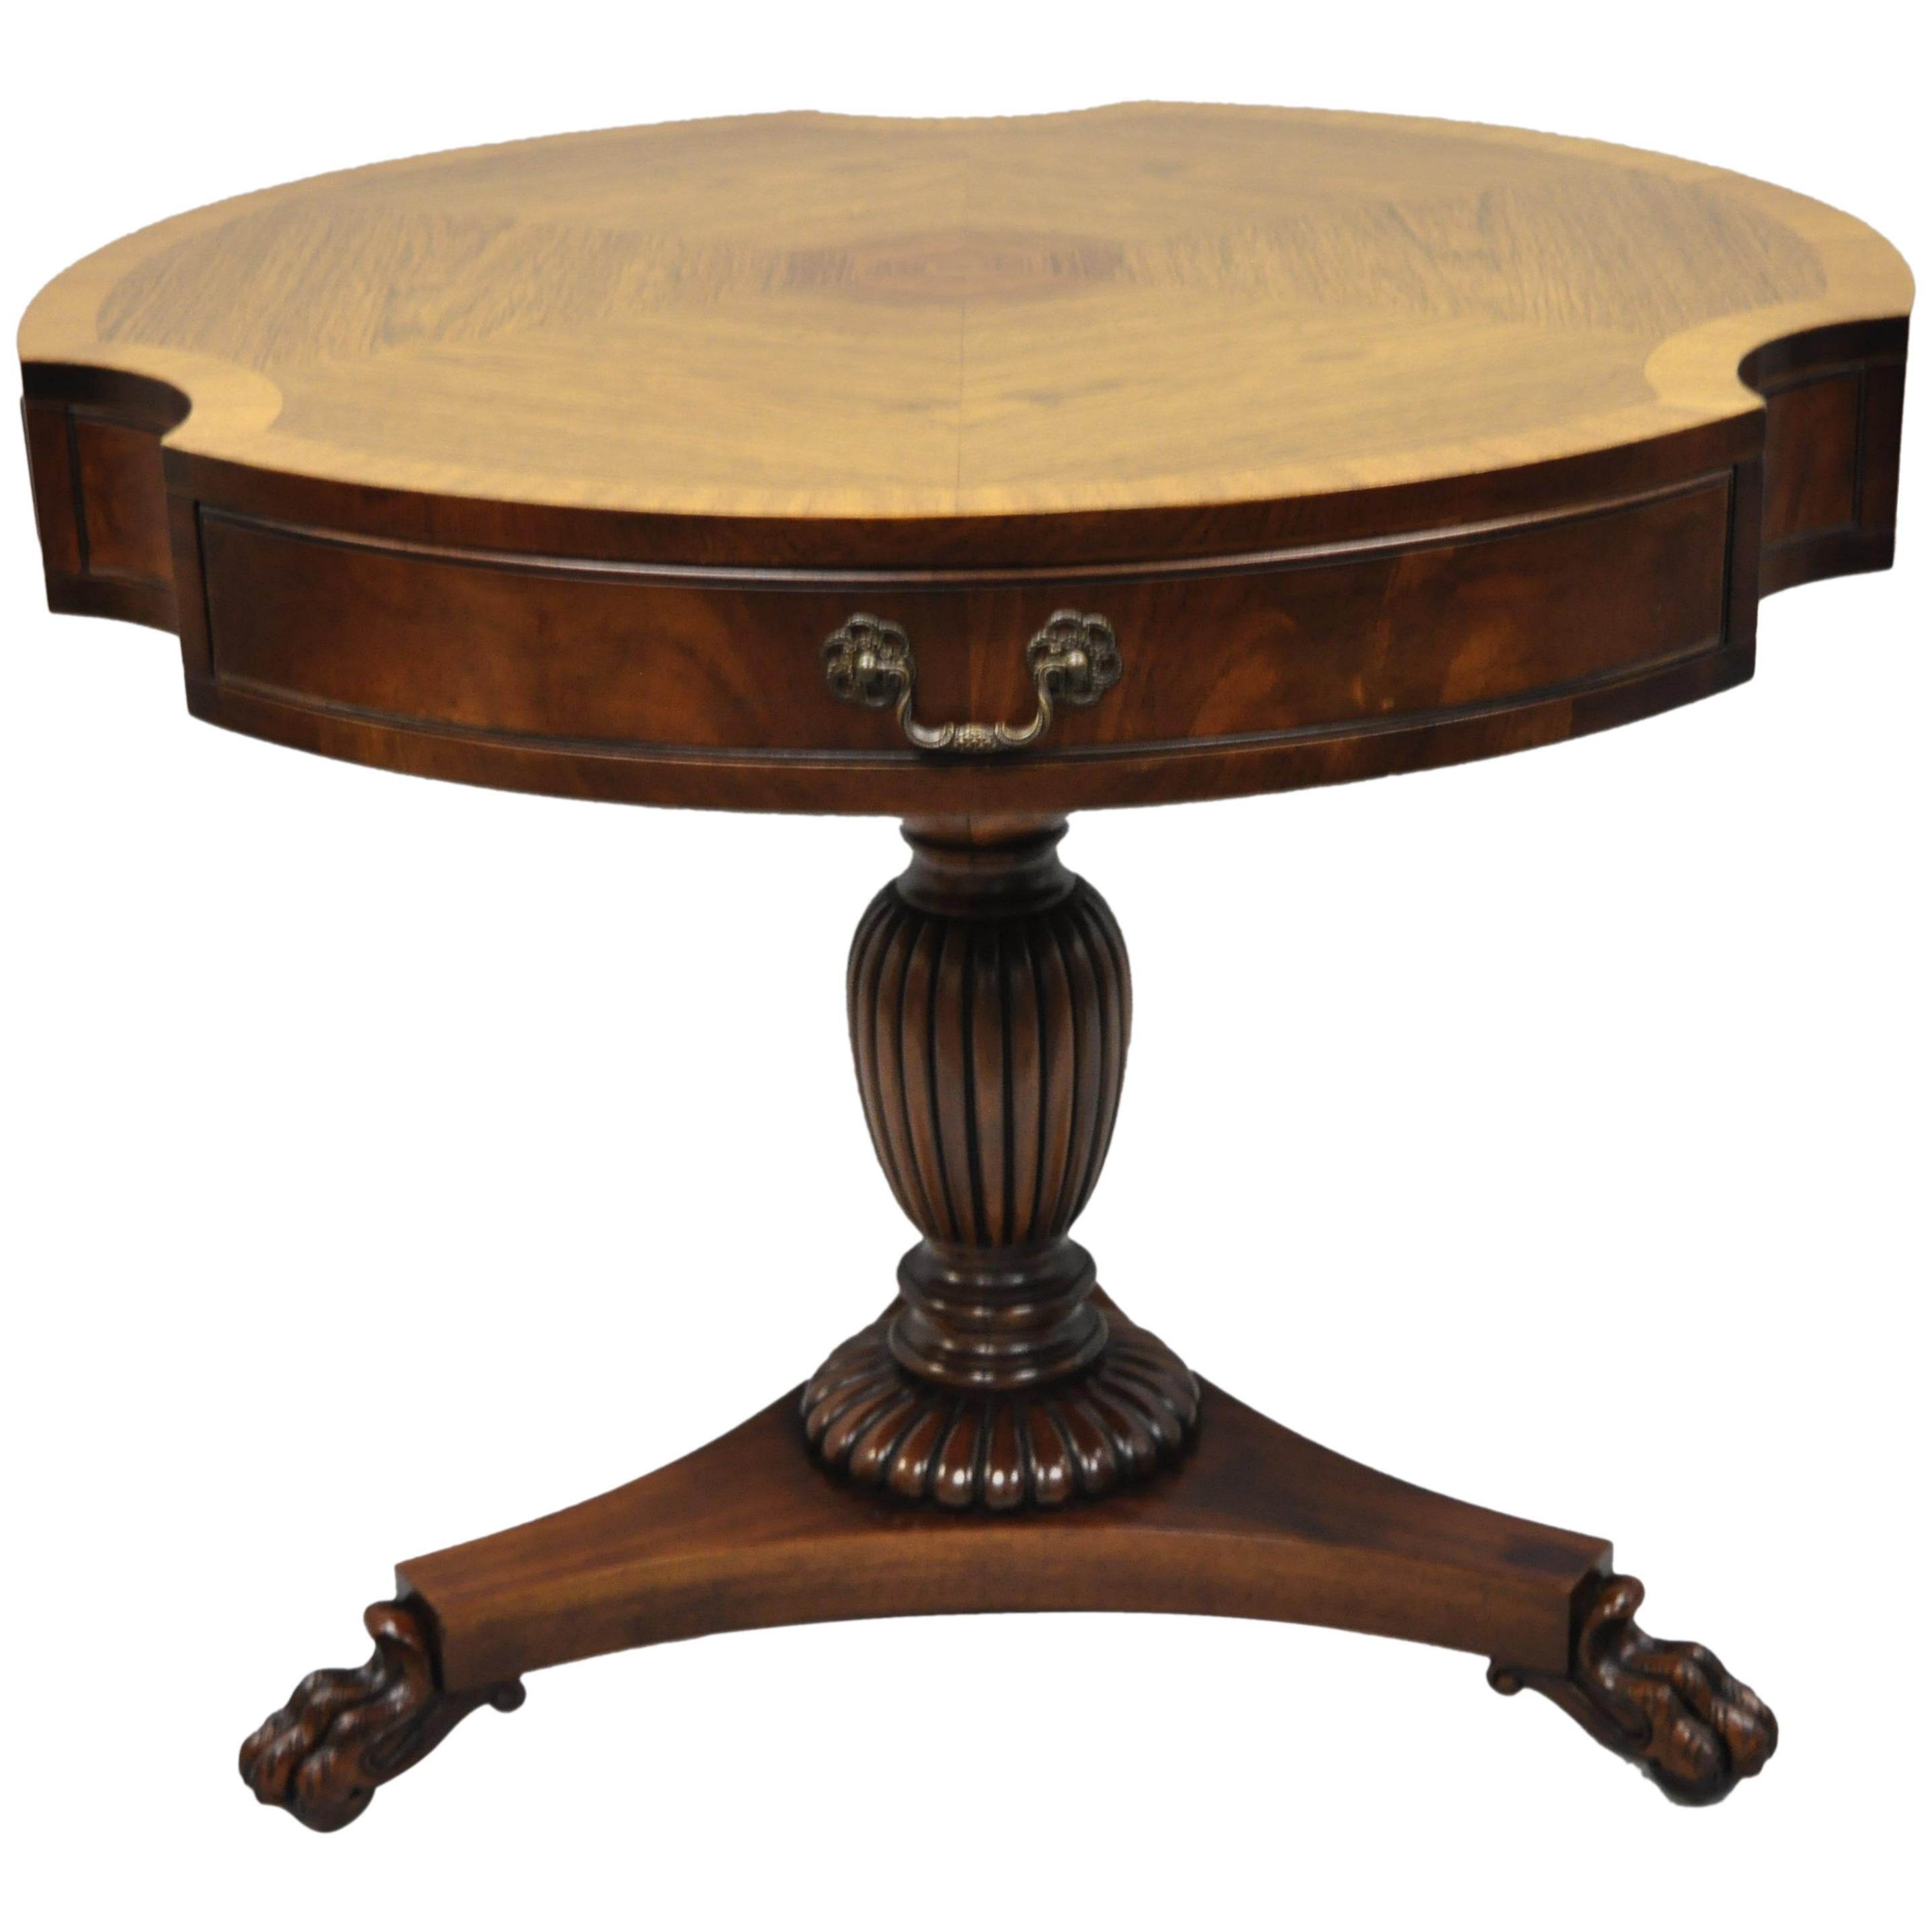 Grosfeld House Mahogany and Rosewood Three Drawer Pedestal Drum Center Table